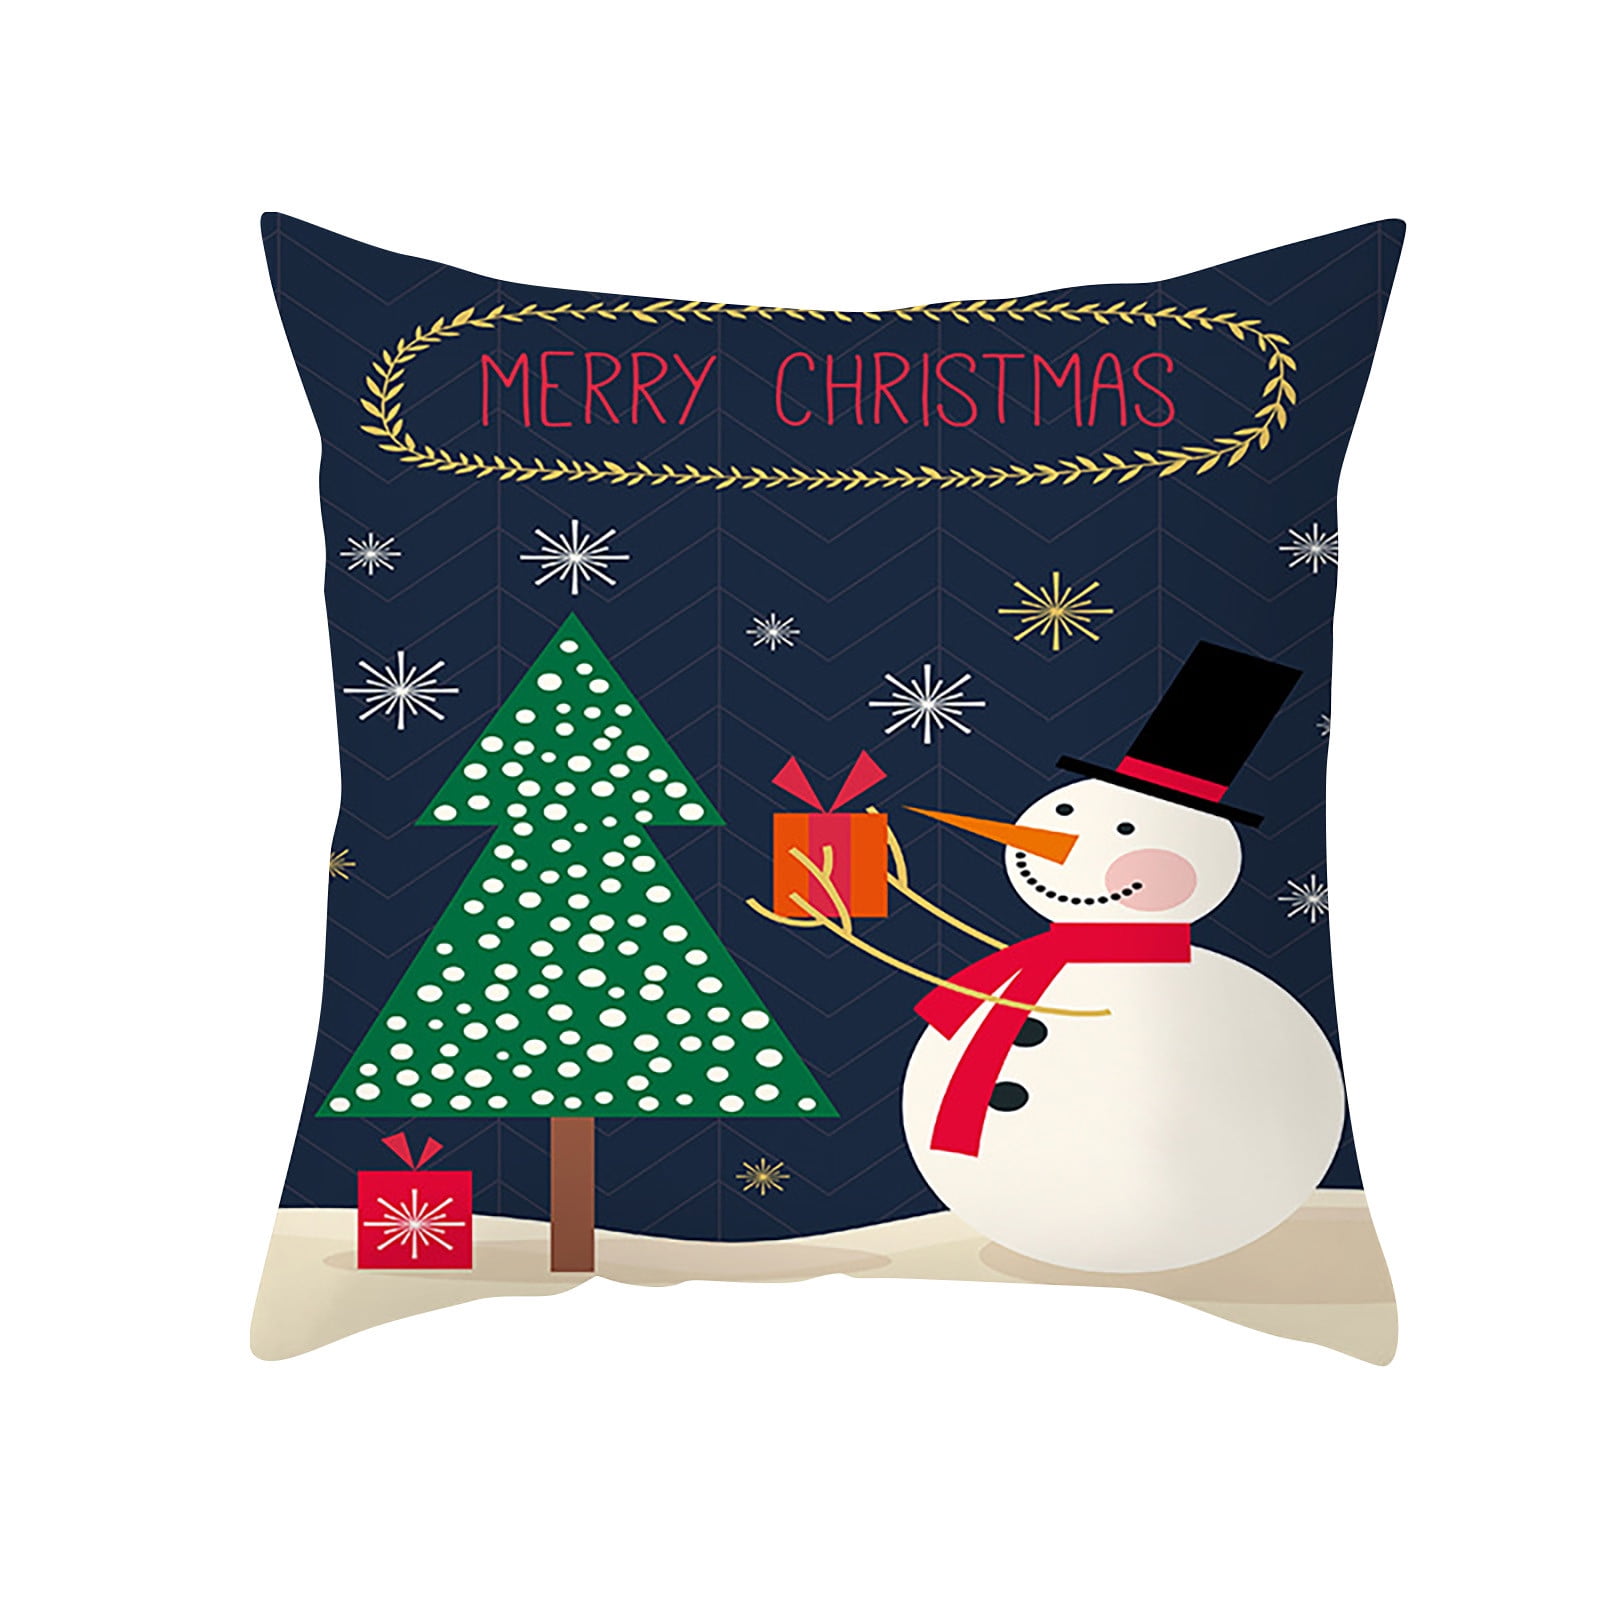 Outdoor Pillows Covers with Inserts 1PCS, Christmas Winter Scene Snowman  Farmhouse Waterproof Pillow with Adjustable Strap Decorative Throw Pillows